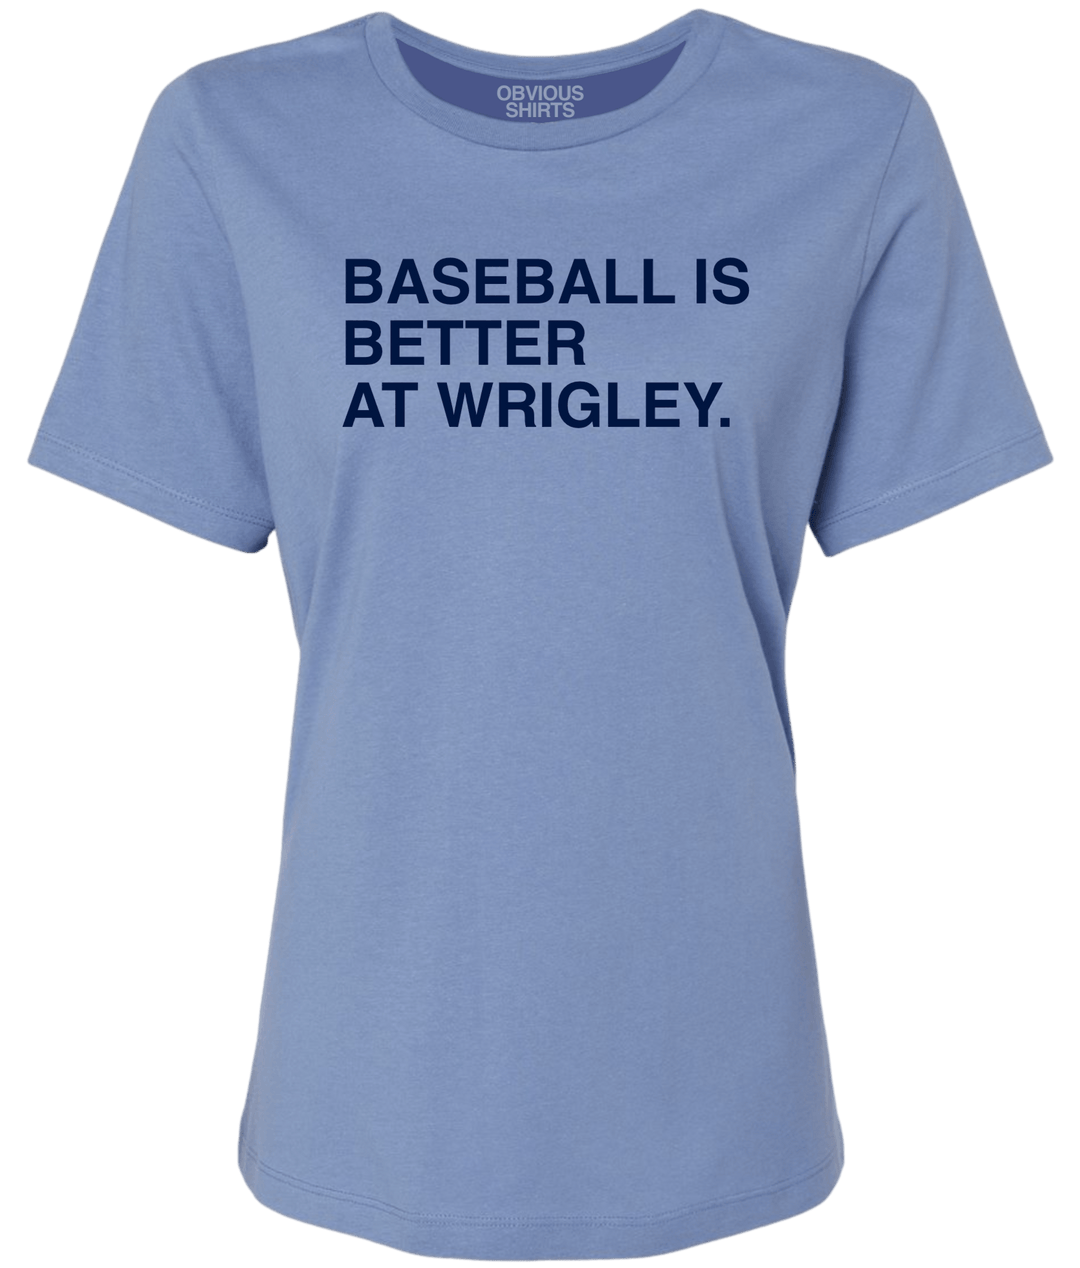 BASEBALL IS BETTER AT WRIGLEY. (WOMEN'S CREW) - OBVIOUS SHIRTS